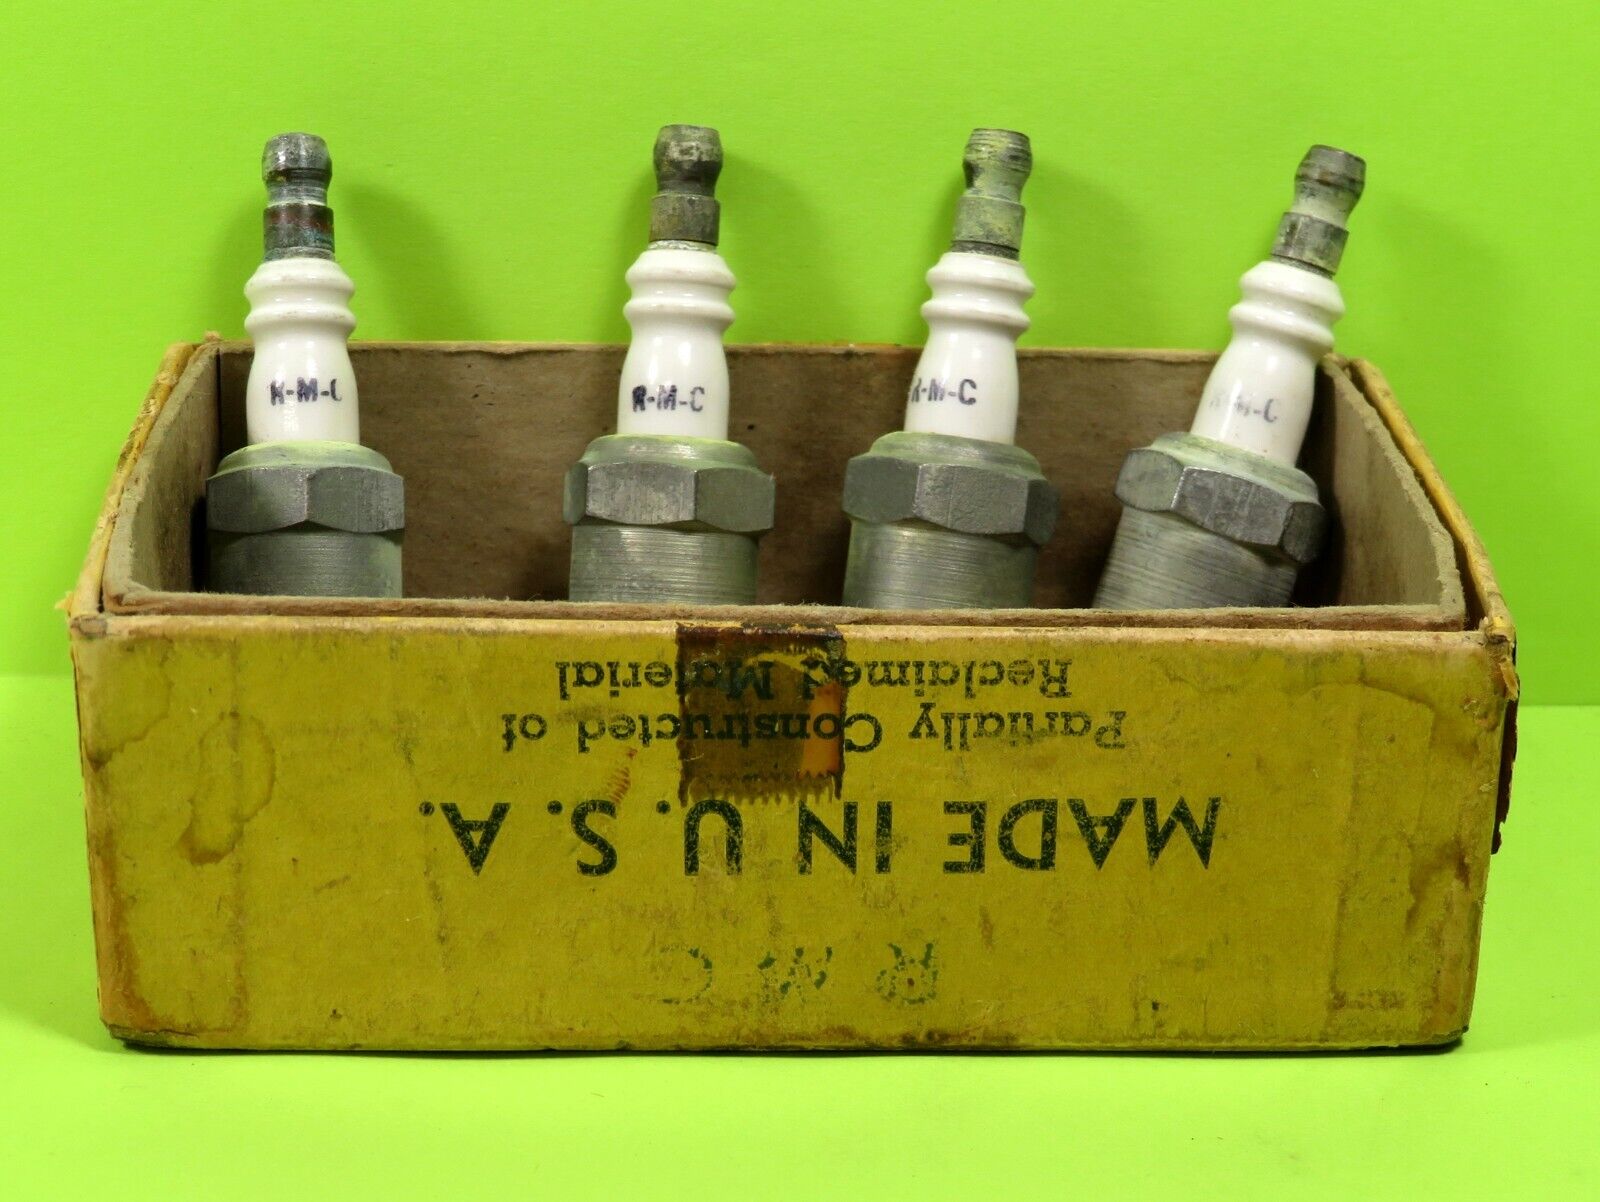 Vintage Set of 4 R-M-C Spark Plugs – Reconditioned in Box